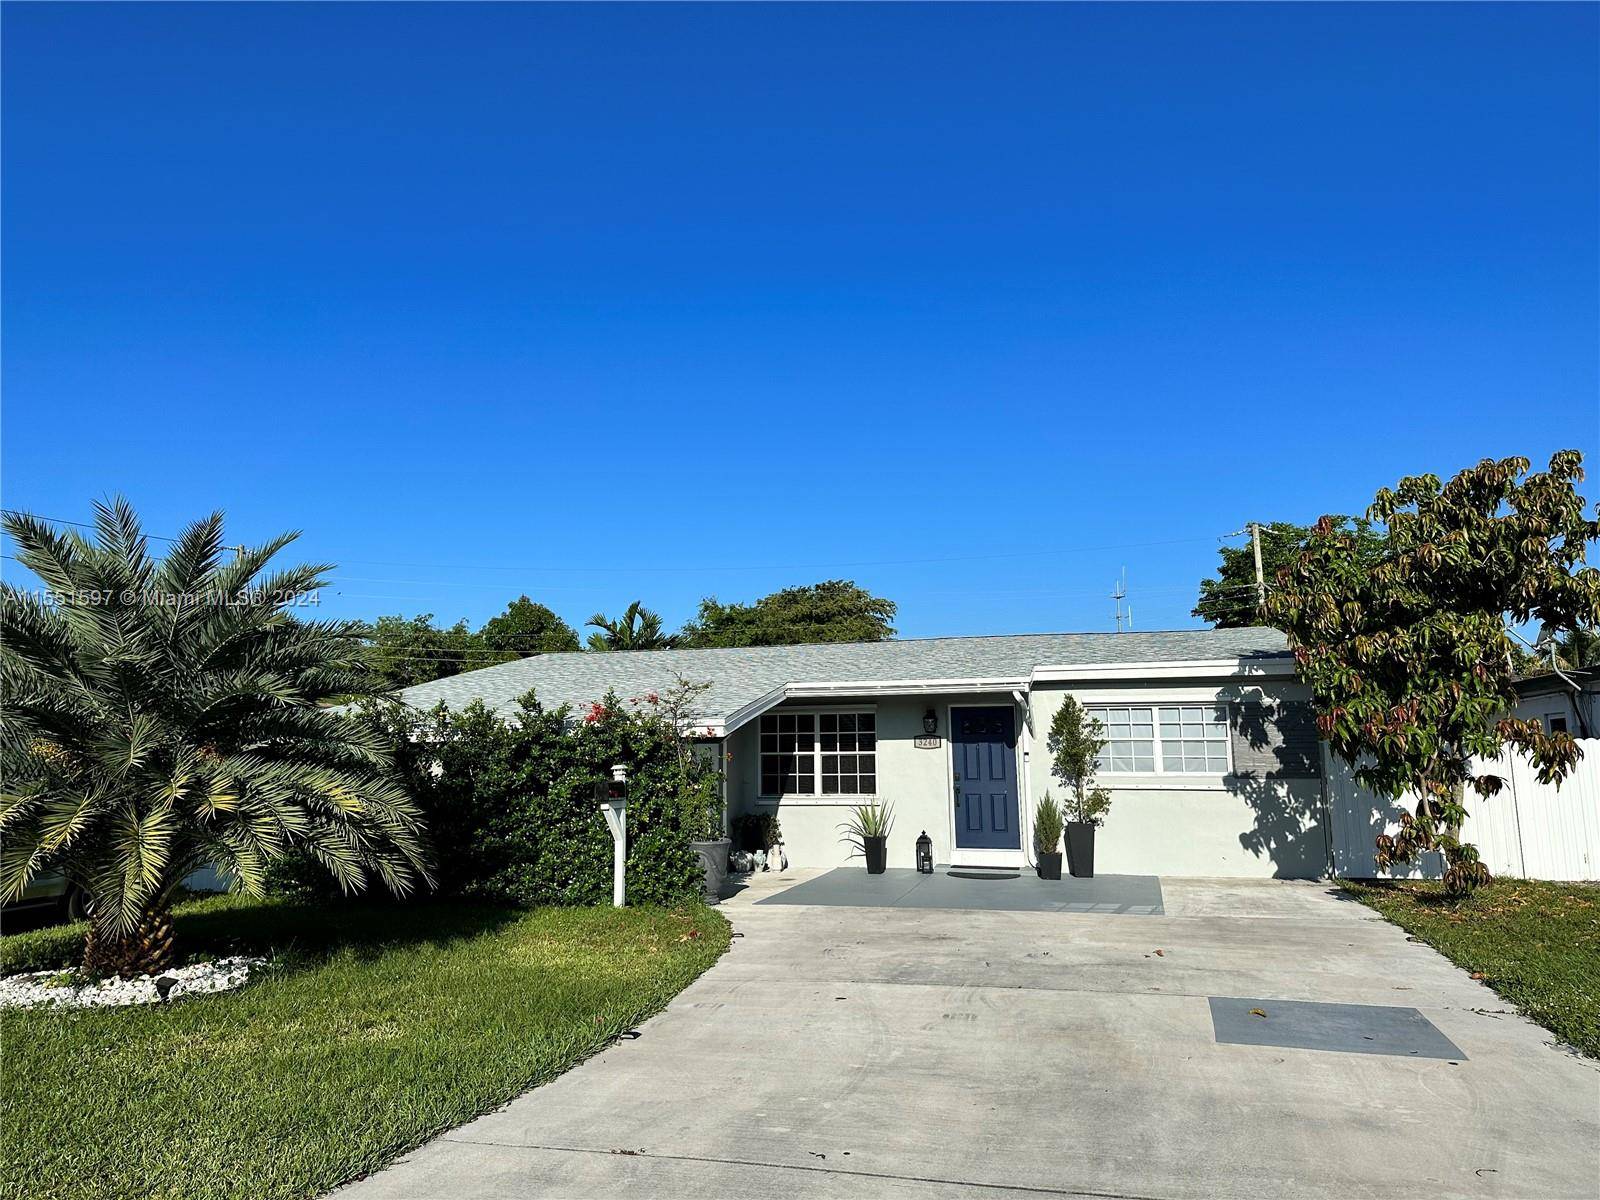 Completely renovated 3 bedrooms and 2 bathrooms home featuring a modern kitchen with beautiful quartz countertops, and white tile backsplash.